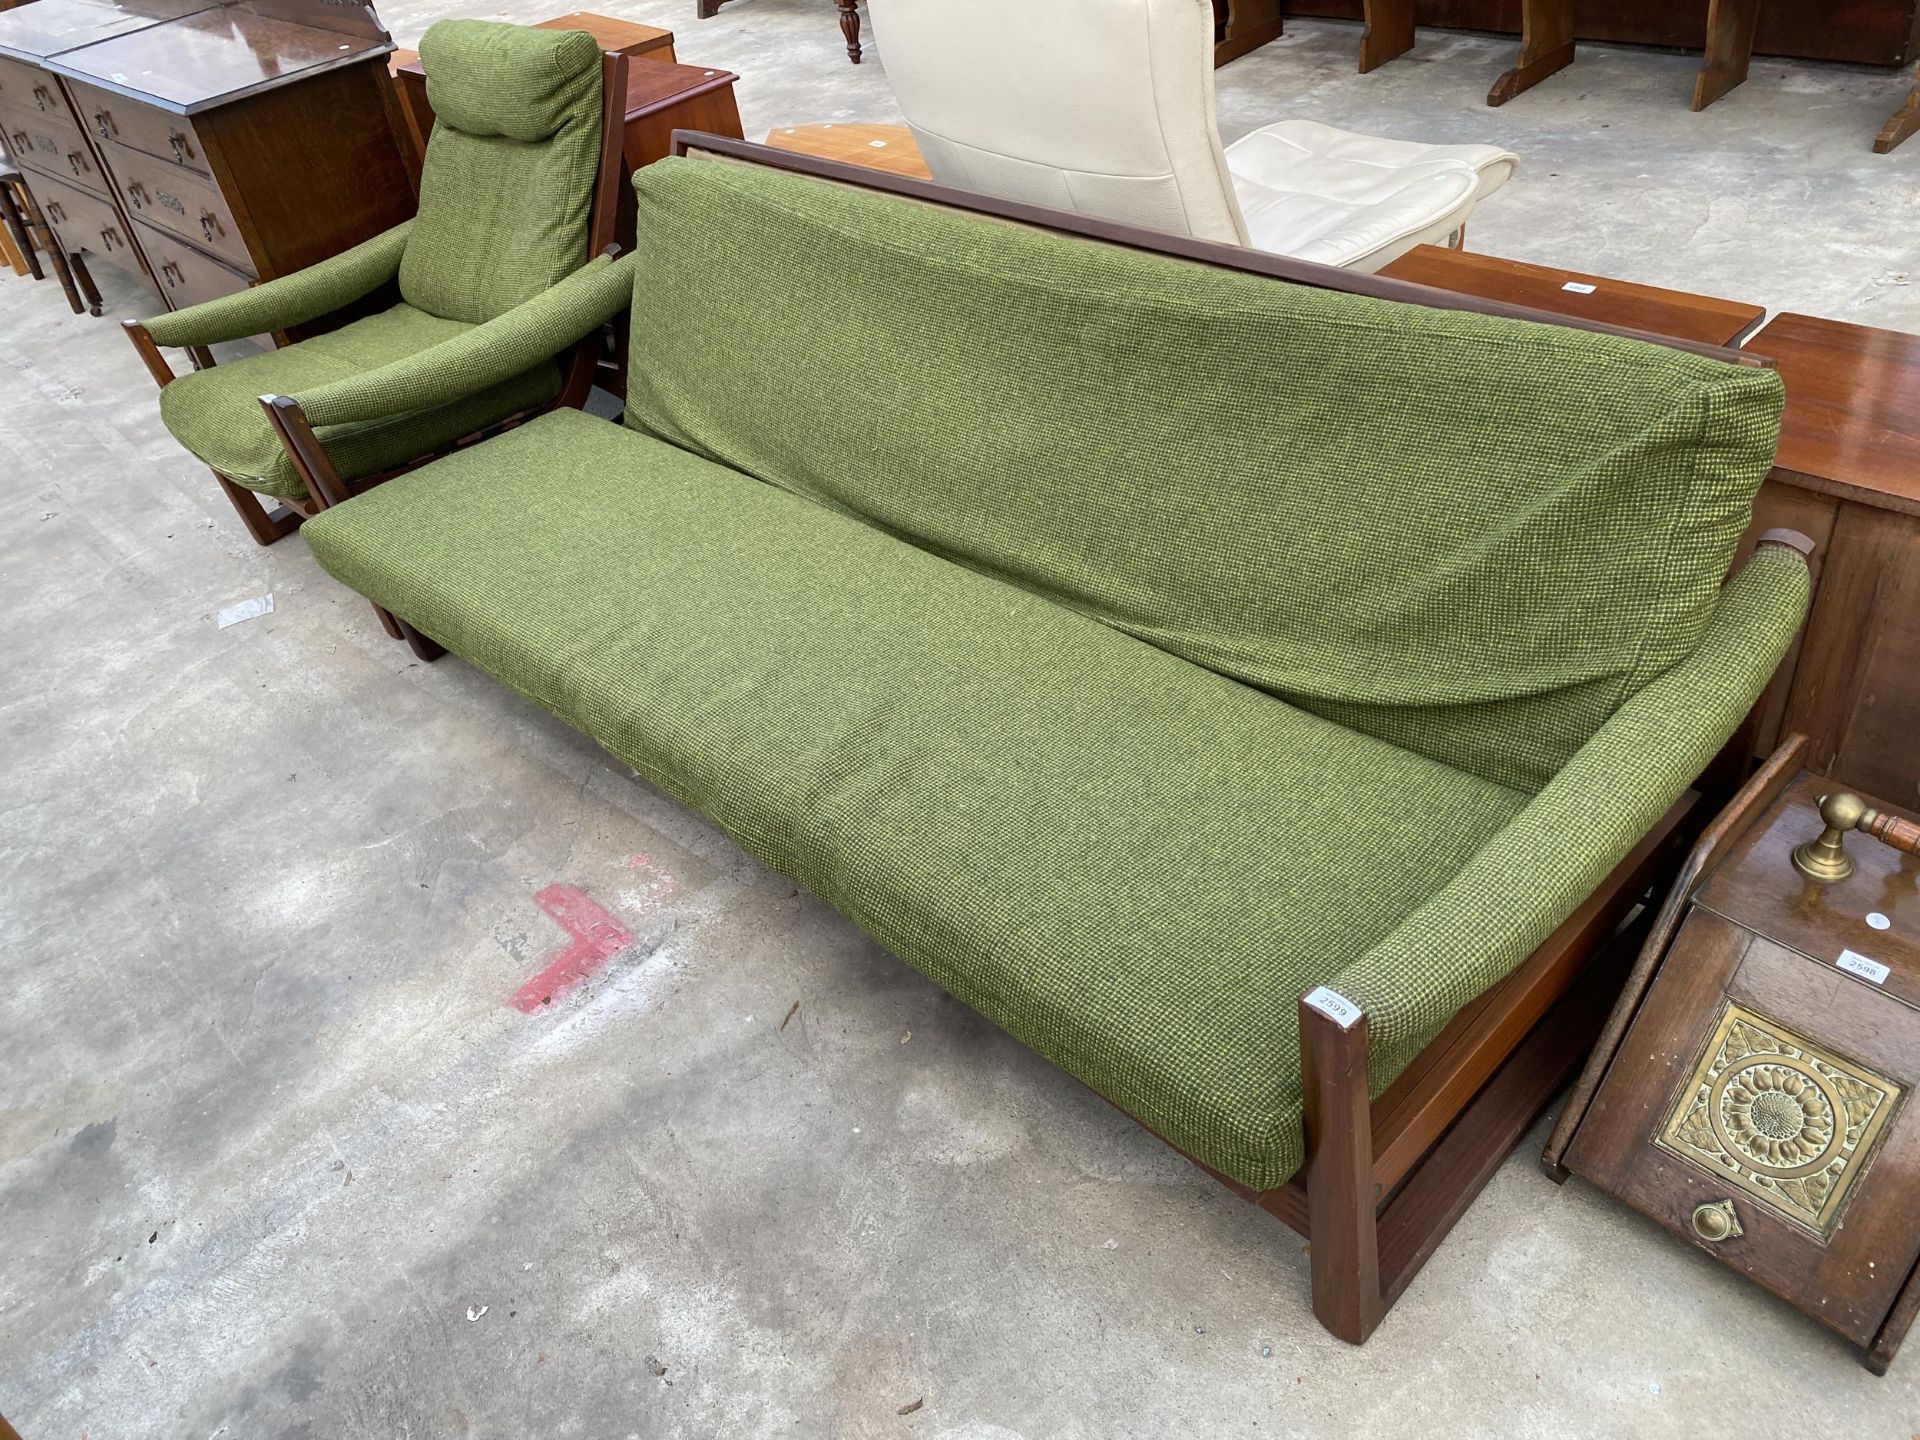 A MID 20TH CENTURY AMFROSIA WOOD SOFA BED